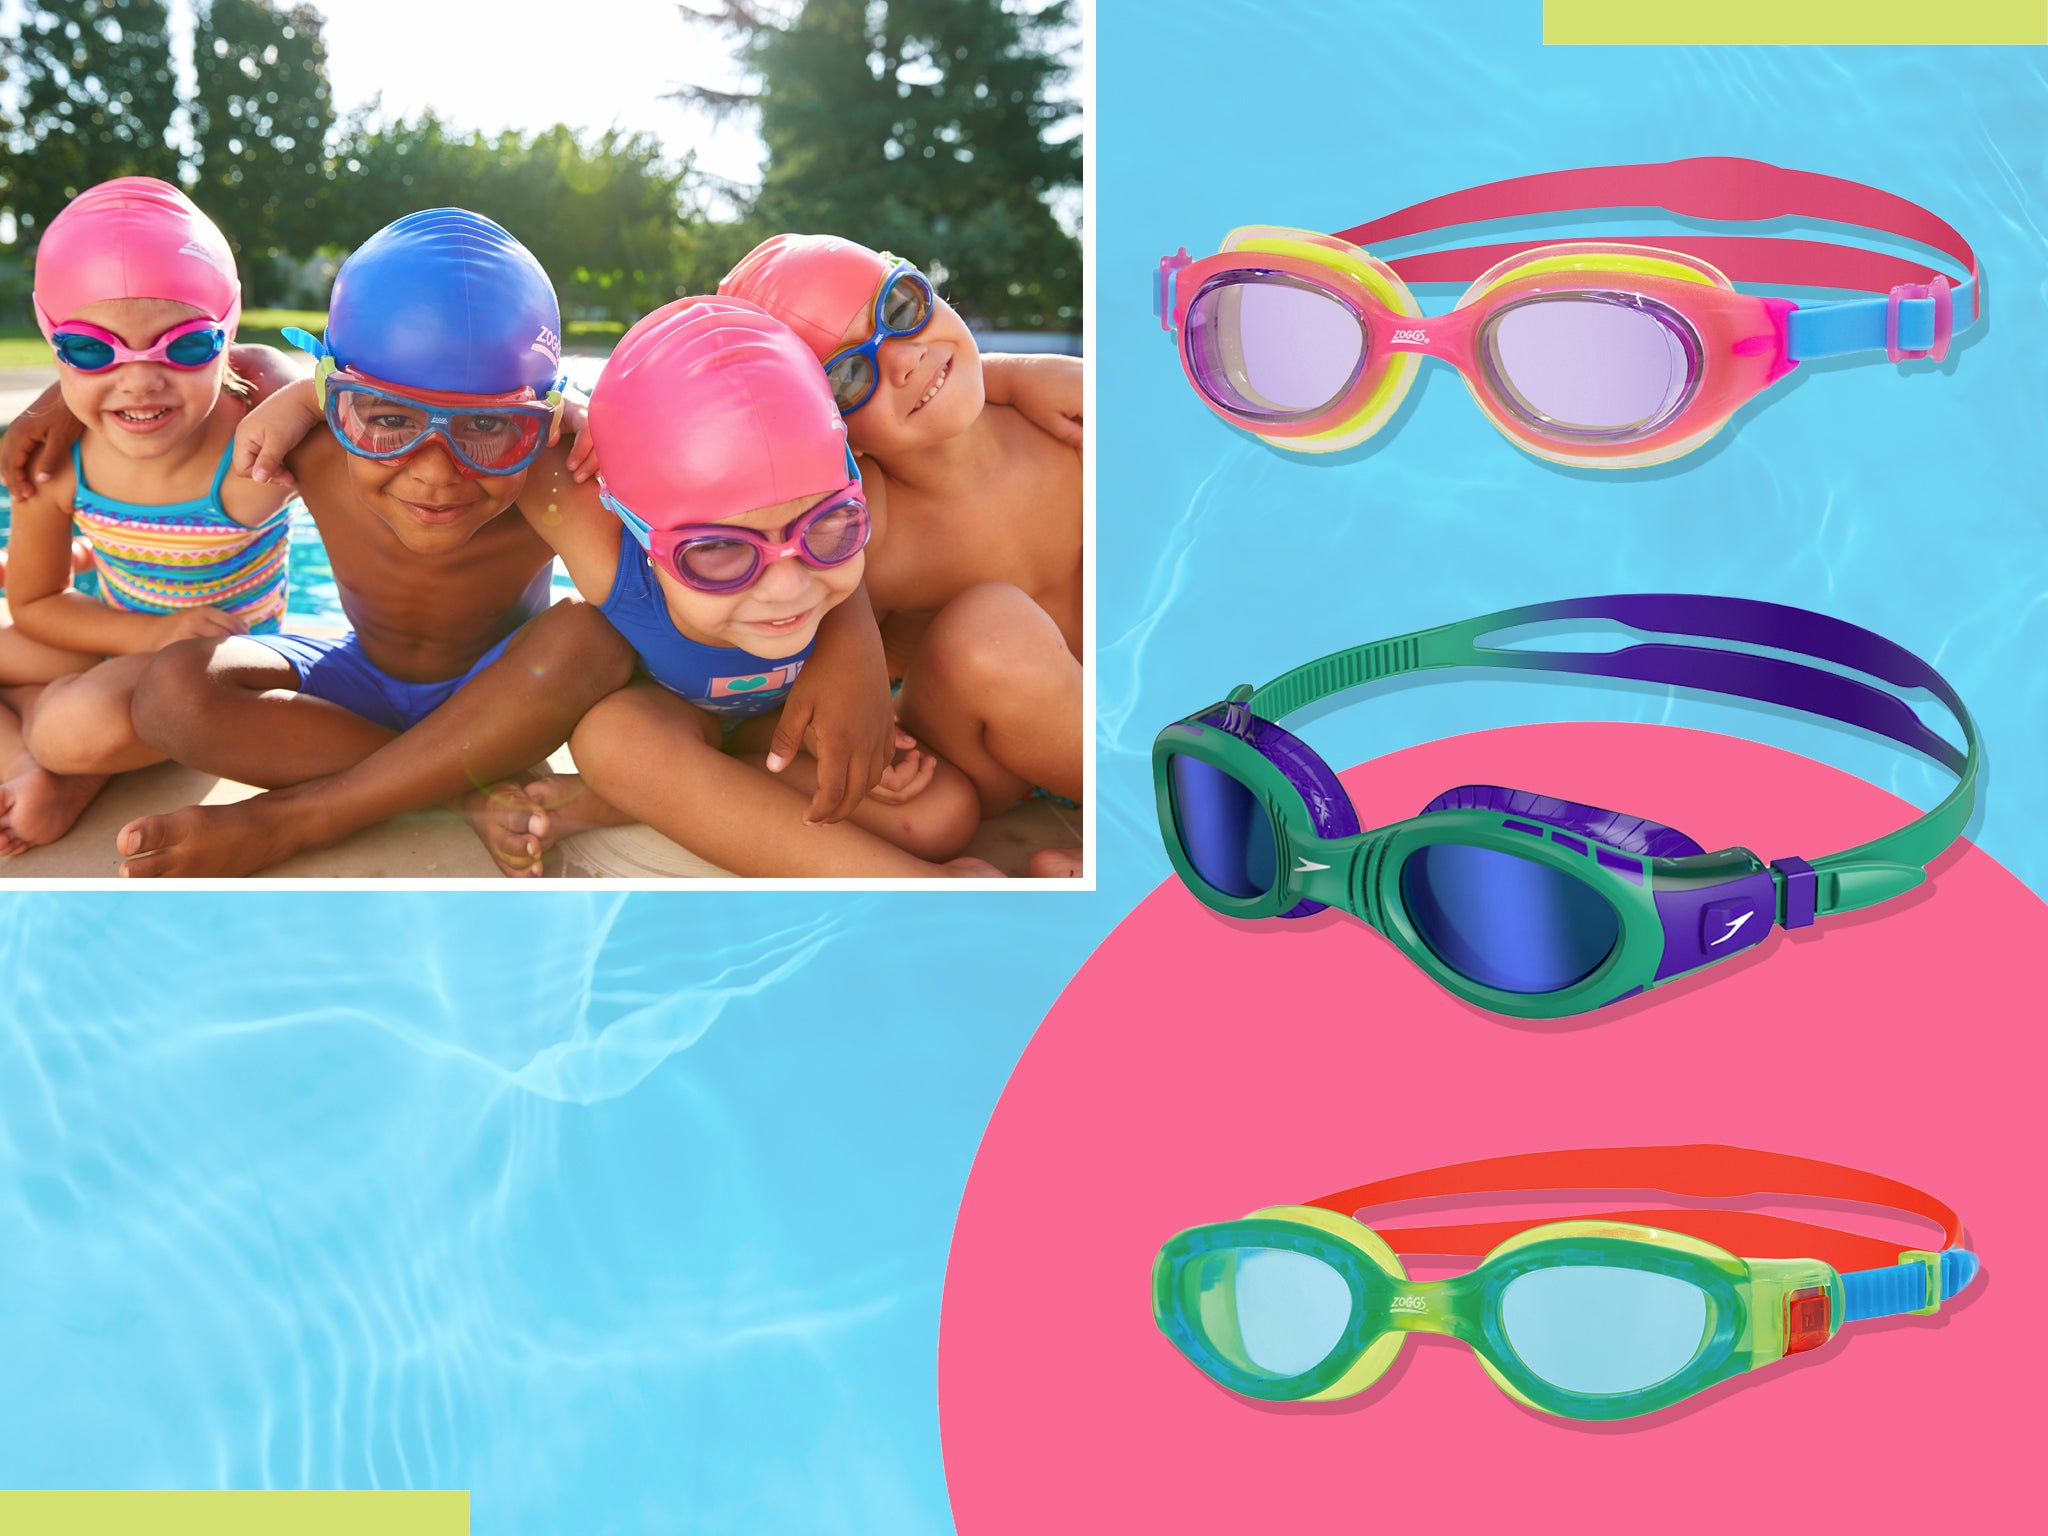 Swimming Glasses Goggles Wide-View Pool Safety Eyewear Earbud Gear Equipment 